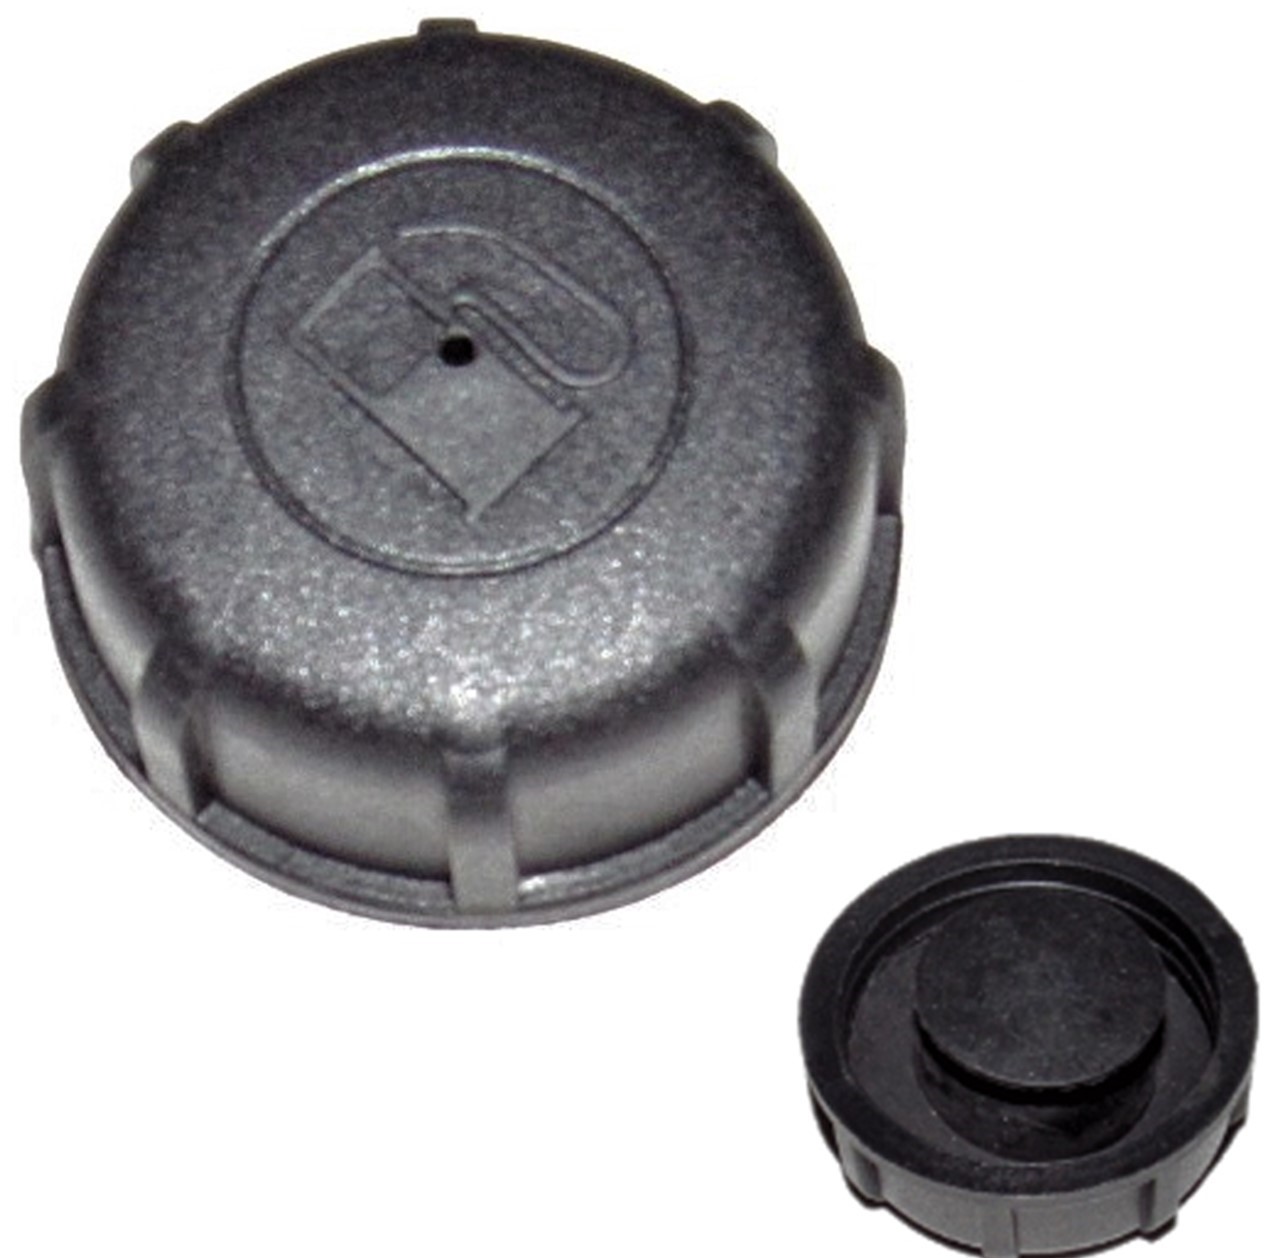 GAS CAP Fits Coleman CT100U, Motovox, and Other Small Mini Bikes and Go Karts.ID= 43mm OD=53mm